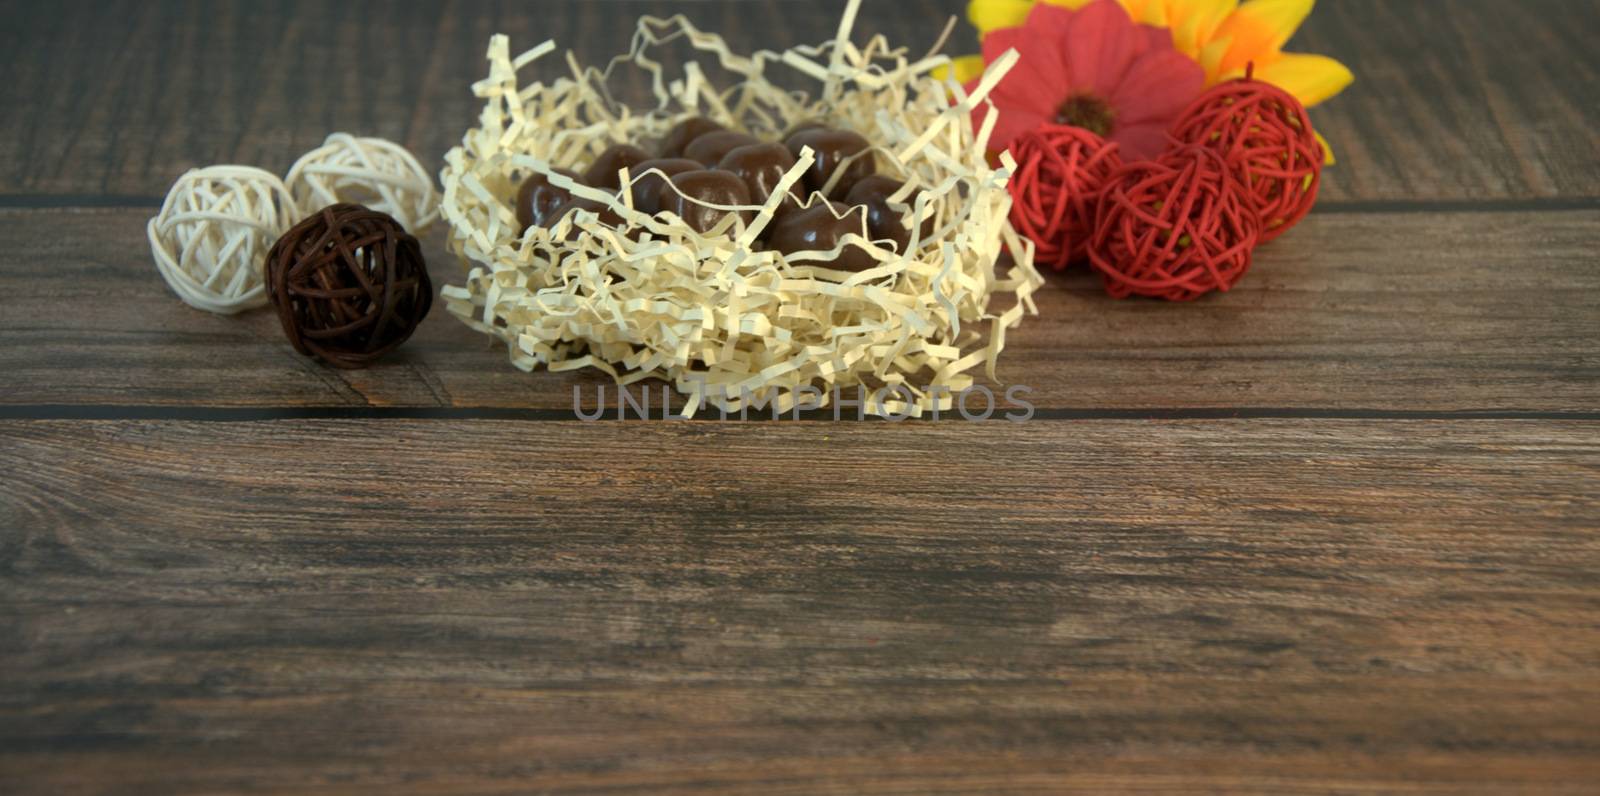 Round chocolates in a nest of straw, multicolored decorative balls and flower buds on a wooden table. Close-up.